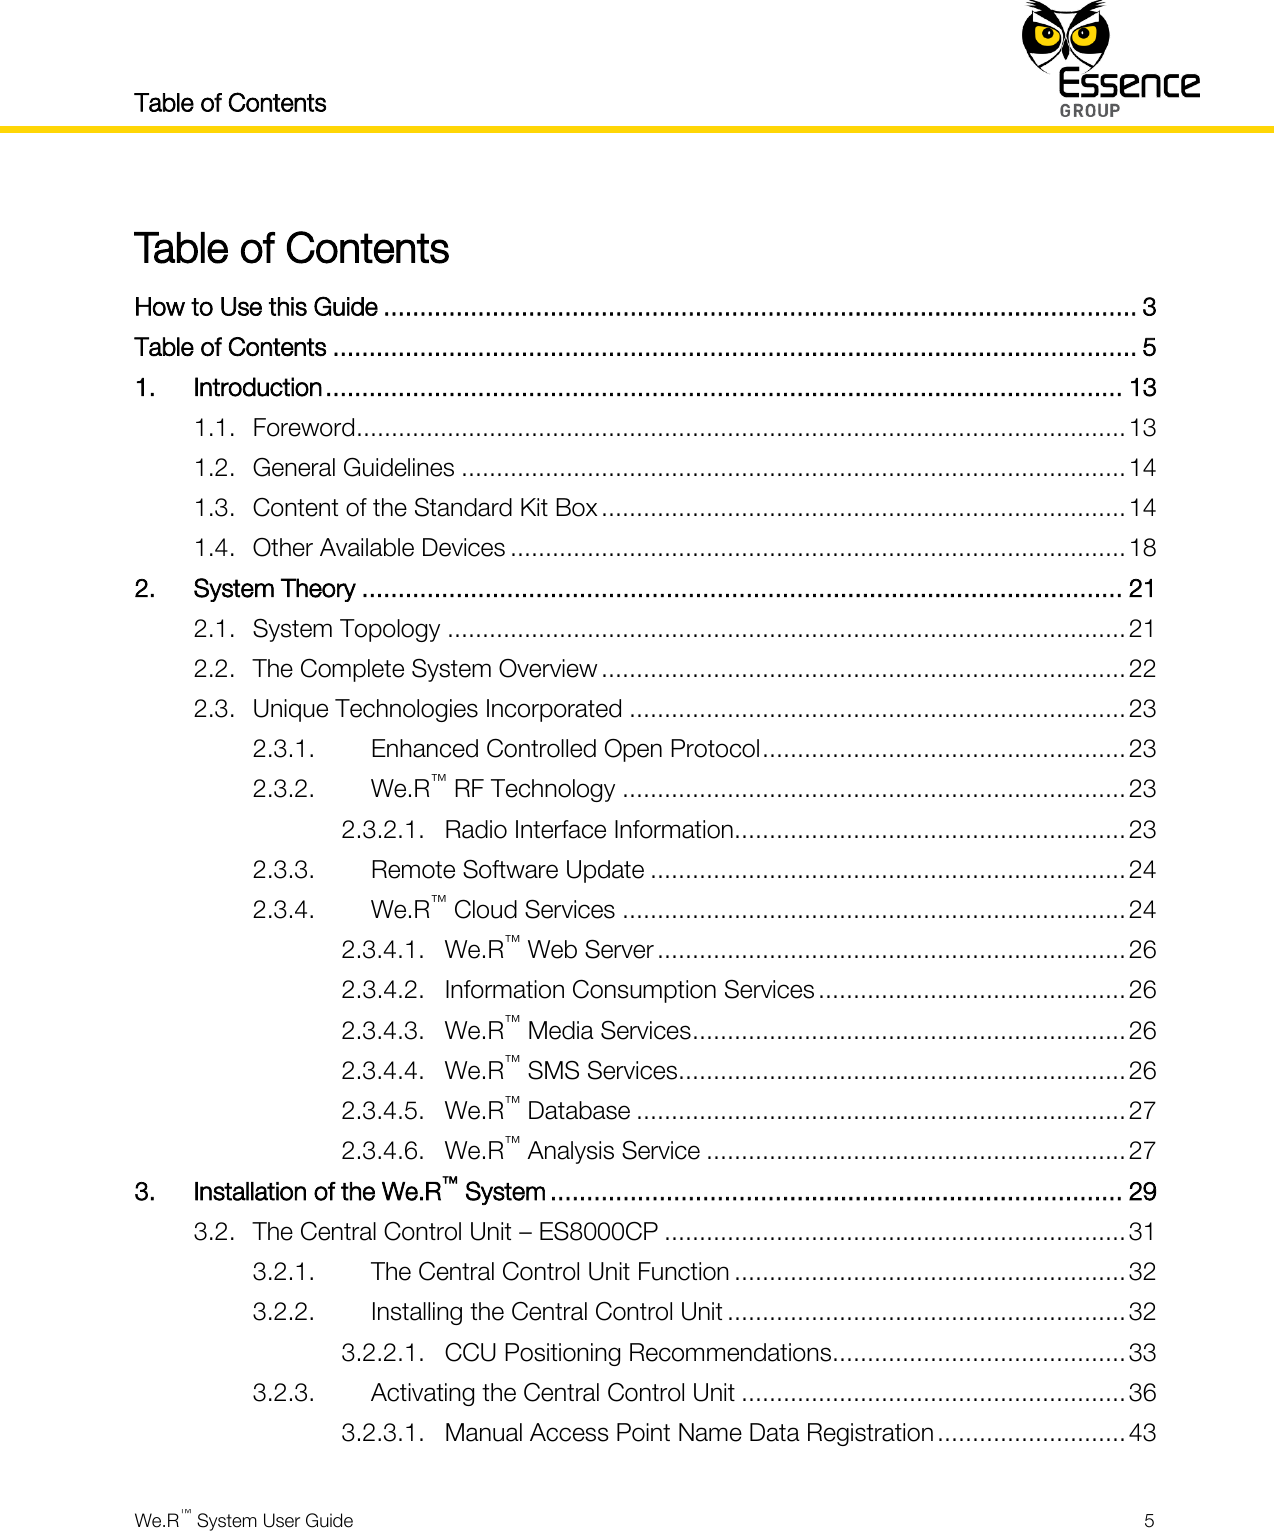 Table of Contents    We.R™ System User Guide  5  Table of Contents How to Use this Guide ........................................................................................................ 3 Table of Contents ............................................................................................................... 5 1. Introduction .............................................................................................................. 13 1.1. Foreword .............................................................................................................. 13 1.2. General Guidelines ............................................................................................... 14 1.3. Content of the Standard Kit Box ........................................................................... 14 1.4. Other Available Devices ........................................................................................ 18 2. System Theory ......................................................................................................... 21 2.1. System Topology ................................................................................................. 21 2.2. The Complete System Overview ........................................................................... 22 2.3. Unique Technologies Incorporated ....................................................................... 23 2.3.1. Enhanced Controlled Open Protocol .................................................... 23 2.3.2. We.R™ RF Technology ........................................................................ 23 2.3.2.1. Radio Interface Information........................................................ 23 2.3.3. Remote Software Update .................................................................... 24 2.3.4. We.R™ Cloud Services ........................................................................ 24 2.3.4.1. We.R™ Web Server ................................................................... 26 2.3.4.2. Information Consumption Services ............................................ 26 2.3.4.3. We.R™ Media Services .............................................................. 26 2.3.4.4. We.R™ SMS Services ................................................................ 26 2.3.4.5. We.R™ Database ...................................................................... 27 2.3.4.6. We.R™ Analysis Service ............................................................ 27 3. Installation of the We.R™ System ............................................................................... 29 3.2. The Central Control Unit – ES8000CP .................................................................. 31 3.2.1. The Central Control Unit Function ........................................................ 32 3.2.2. Installing the Central Control Unit ......................................................... 32 3.2.2.1. CCU Positioning Recommendations .......................................... 33 3.2.3. Activating the Central Control Unit ....................................................... 36 3.2.3.1. Manual Access Point Name Data Registration ........................... 43 